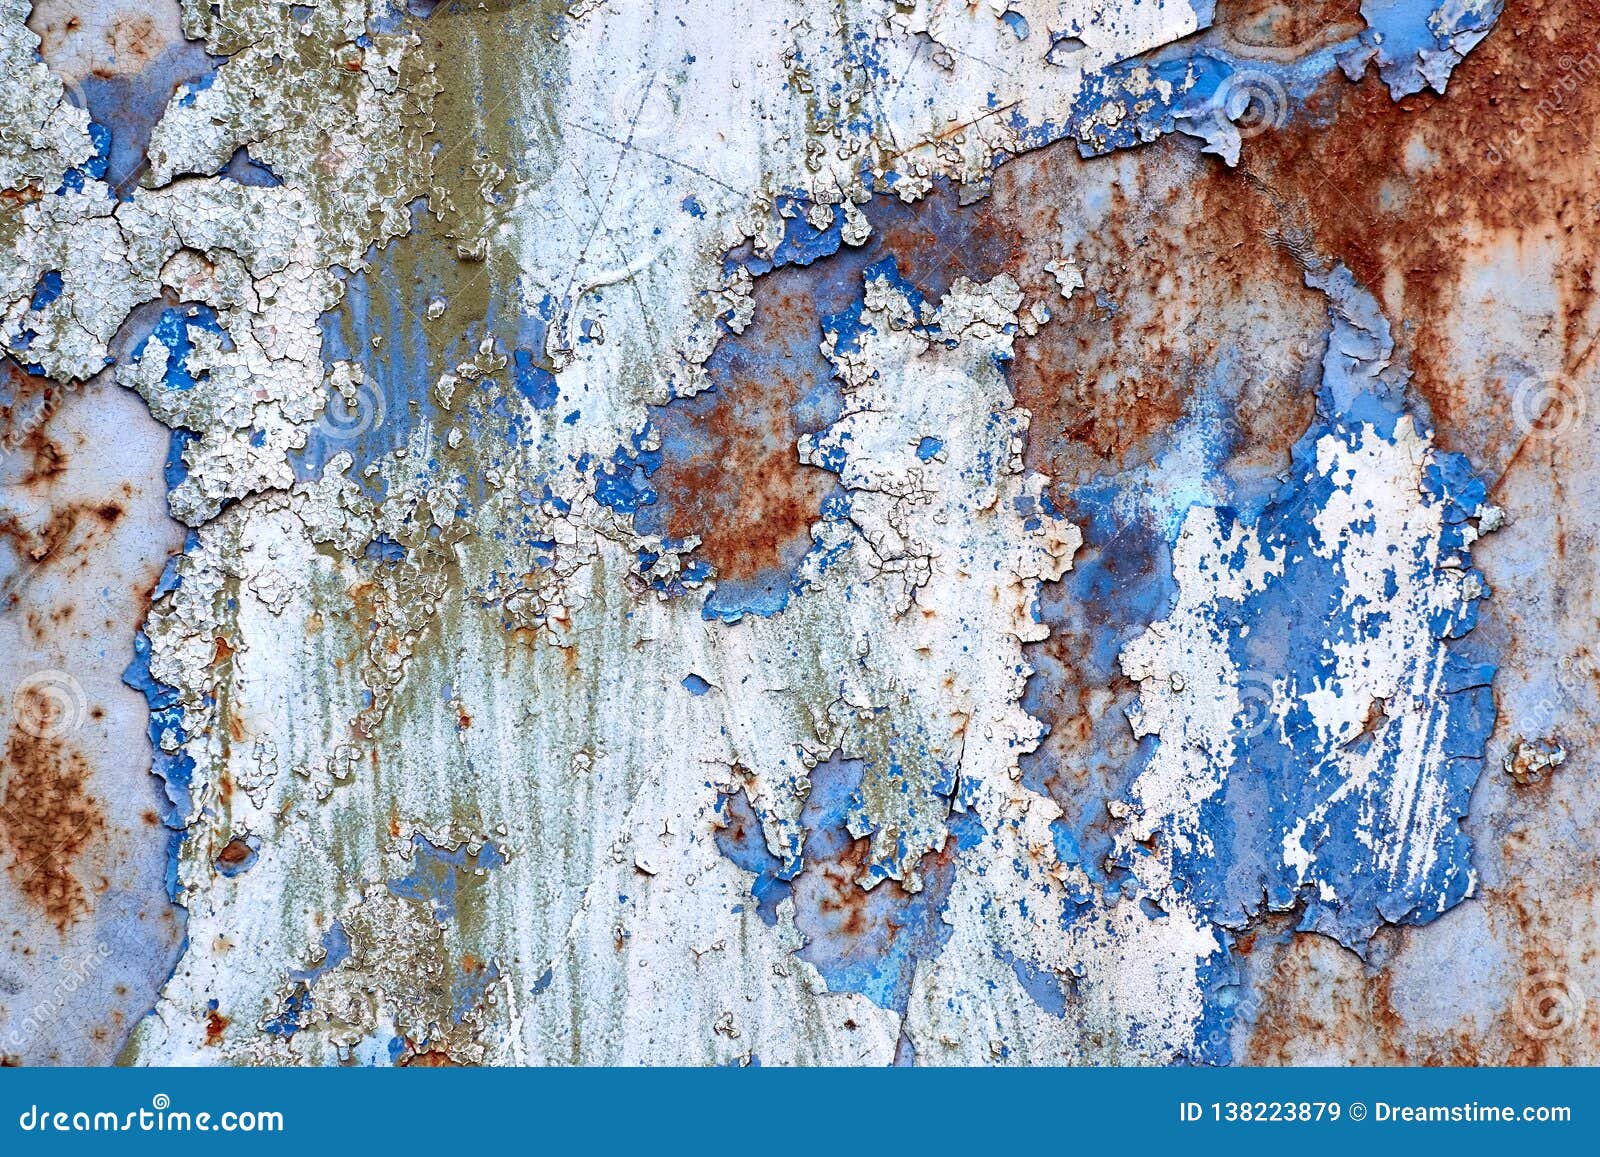 Rust and blue фото 65